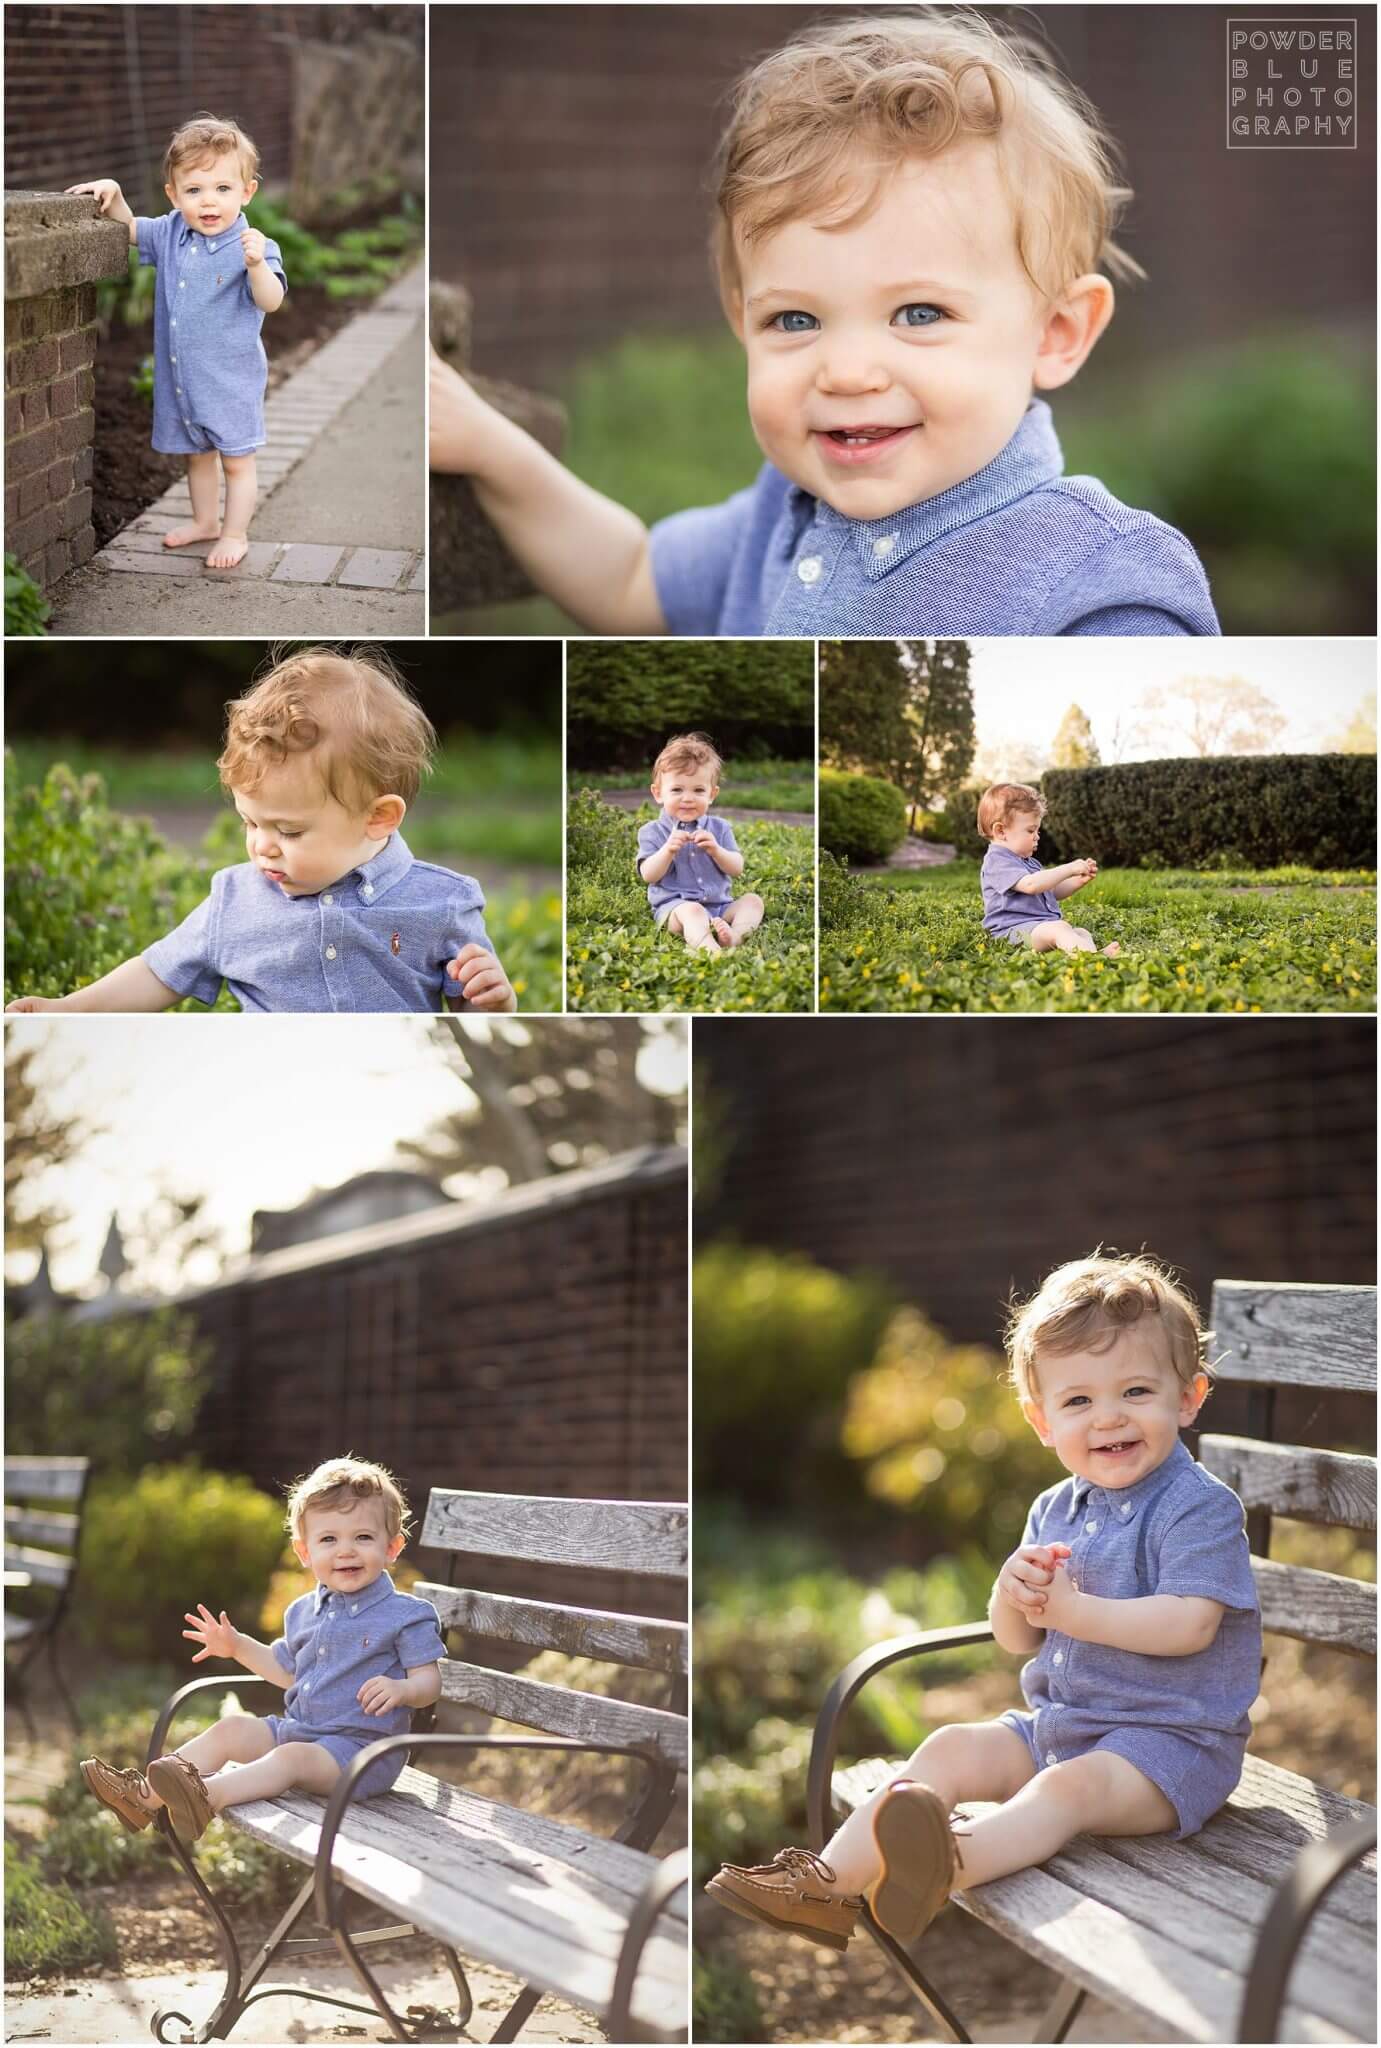 first year baby photography session at mellon park in pittsburgh.